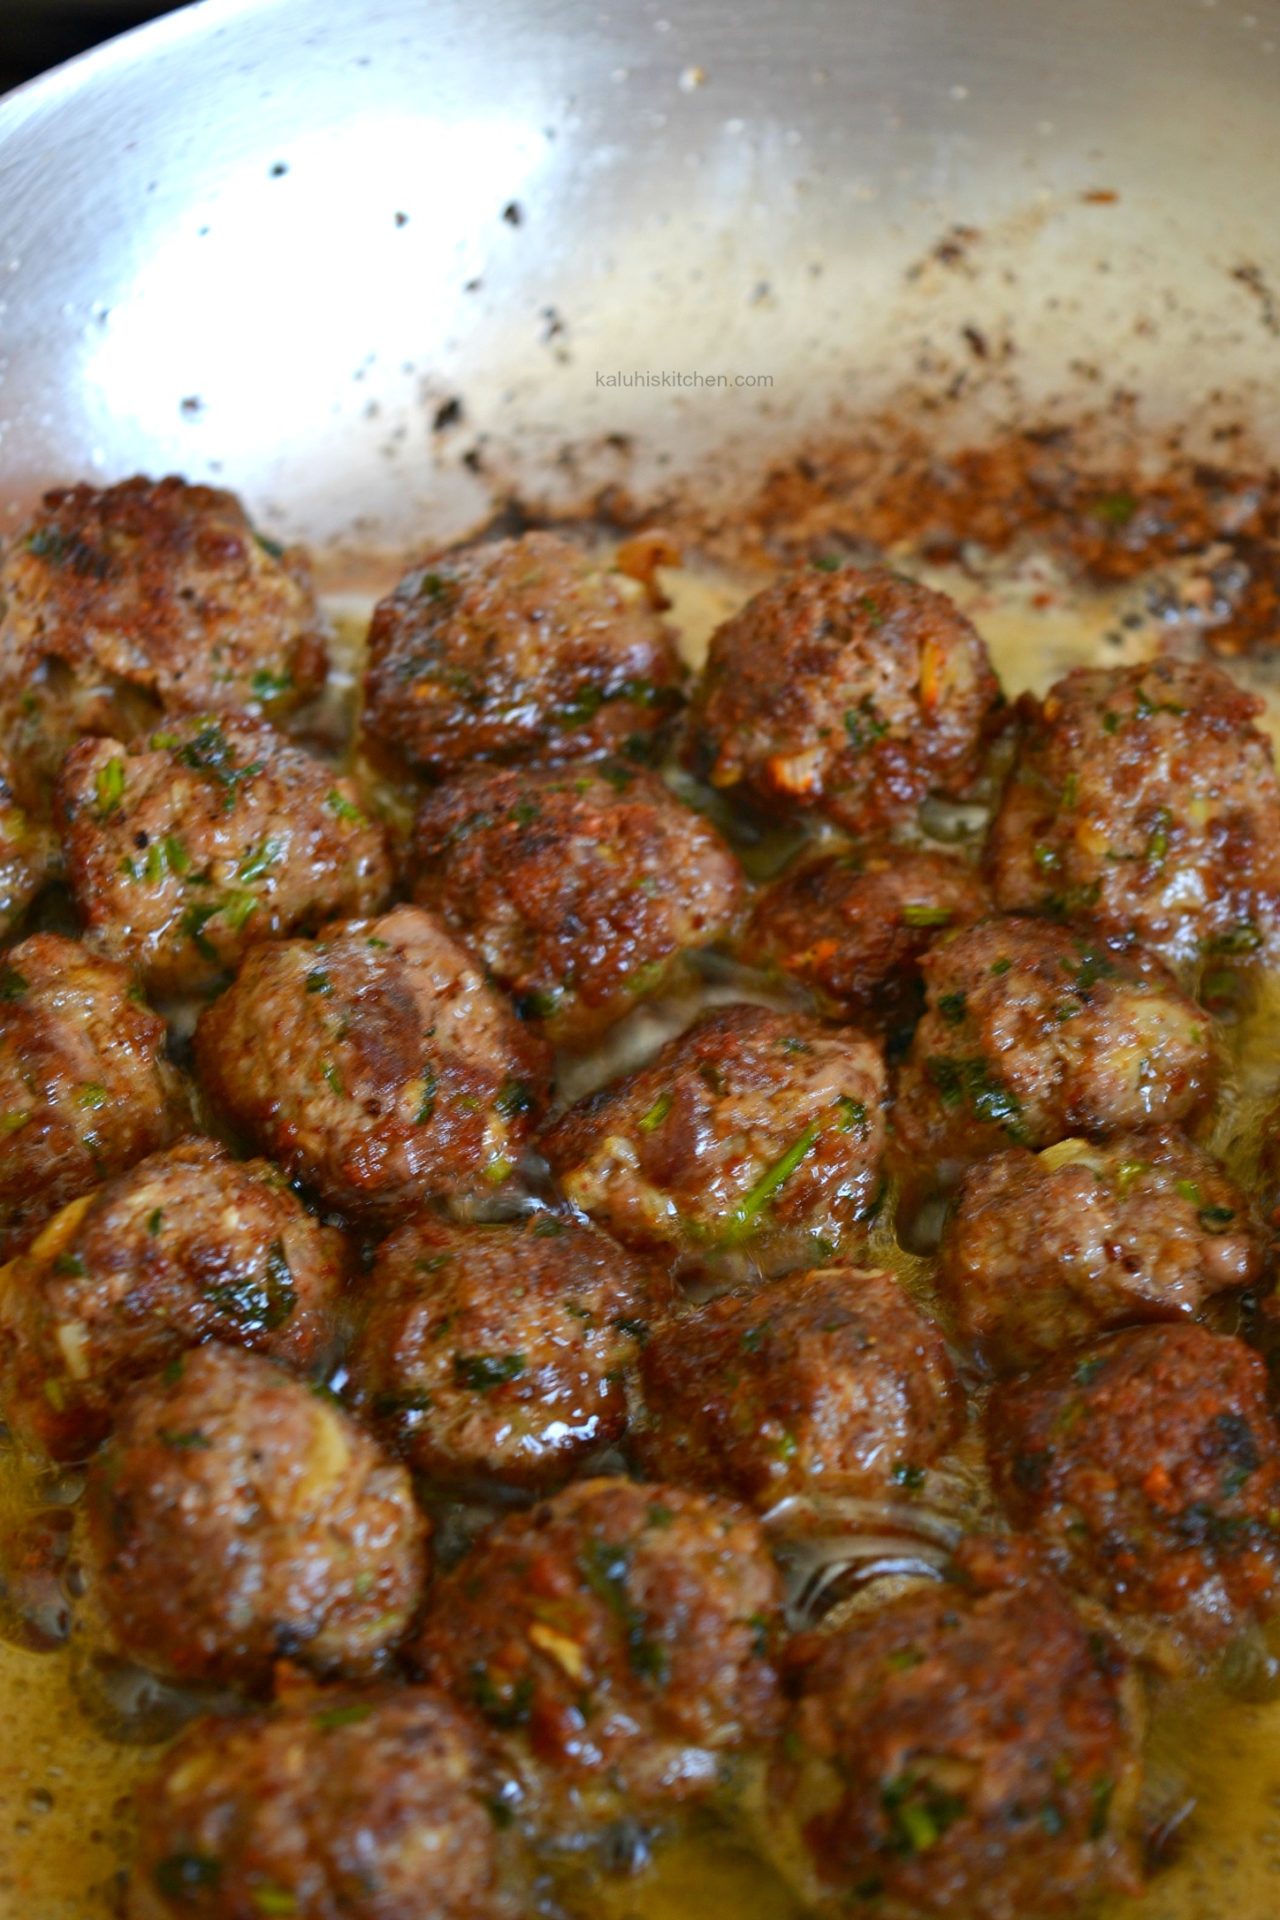 shallow fry your mbuzi meat balls until they have a nice charr on the outside and are cooked through_mbuzi meatball mshikaki_kaluhiskitchen.com